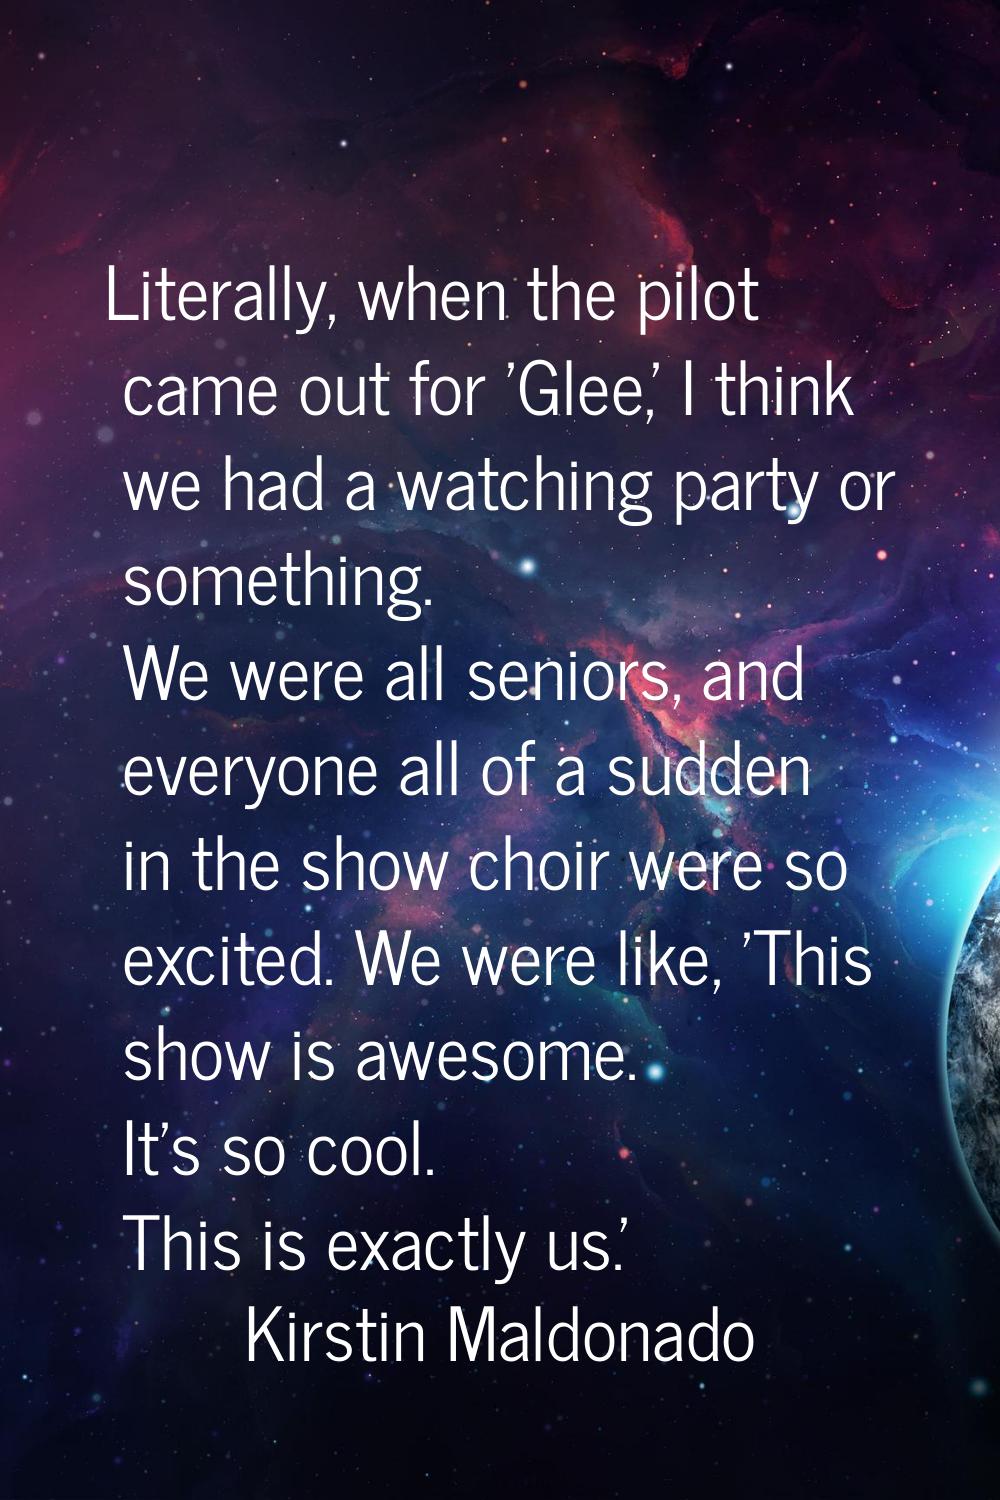 Literally, when the pilot came out for 'Glee,' I think we had a watching party or something. We wer